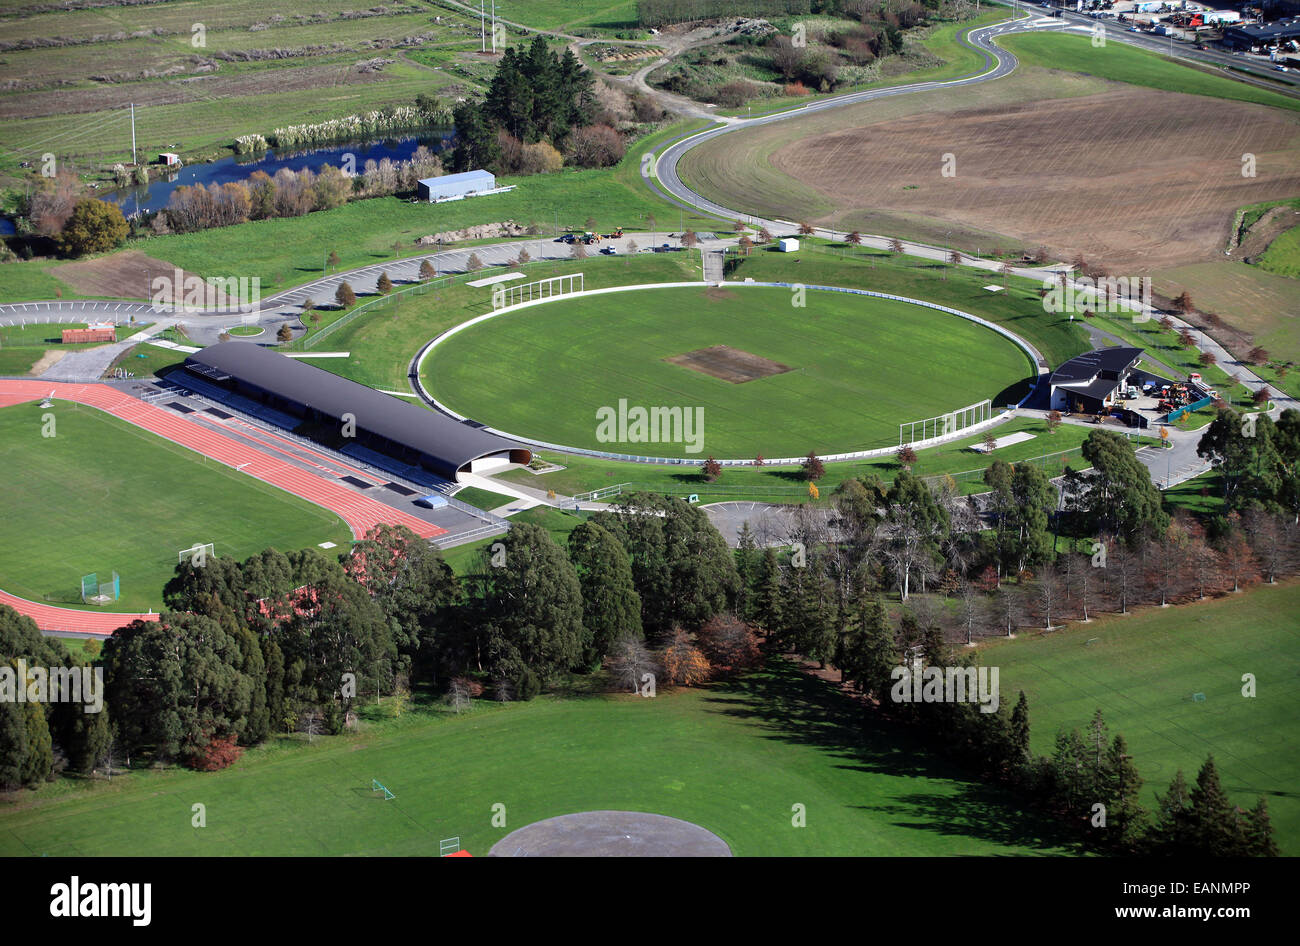 Saxton Oval cricket pitch to be used for three matches in the 2015 Cricket World Cup, being hosted by New Zealand and Australia Stock Photo